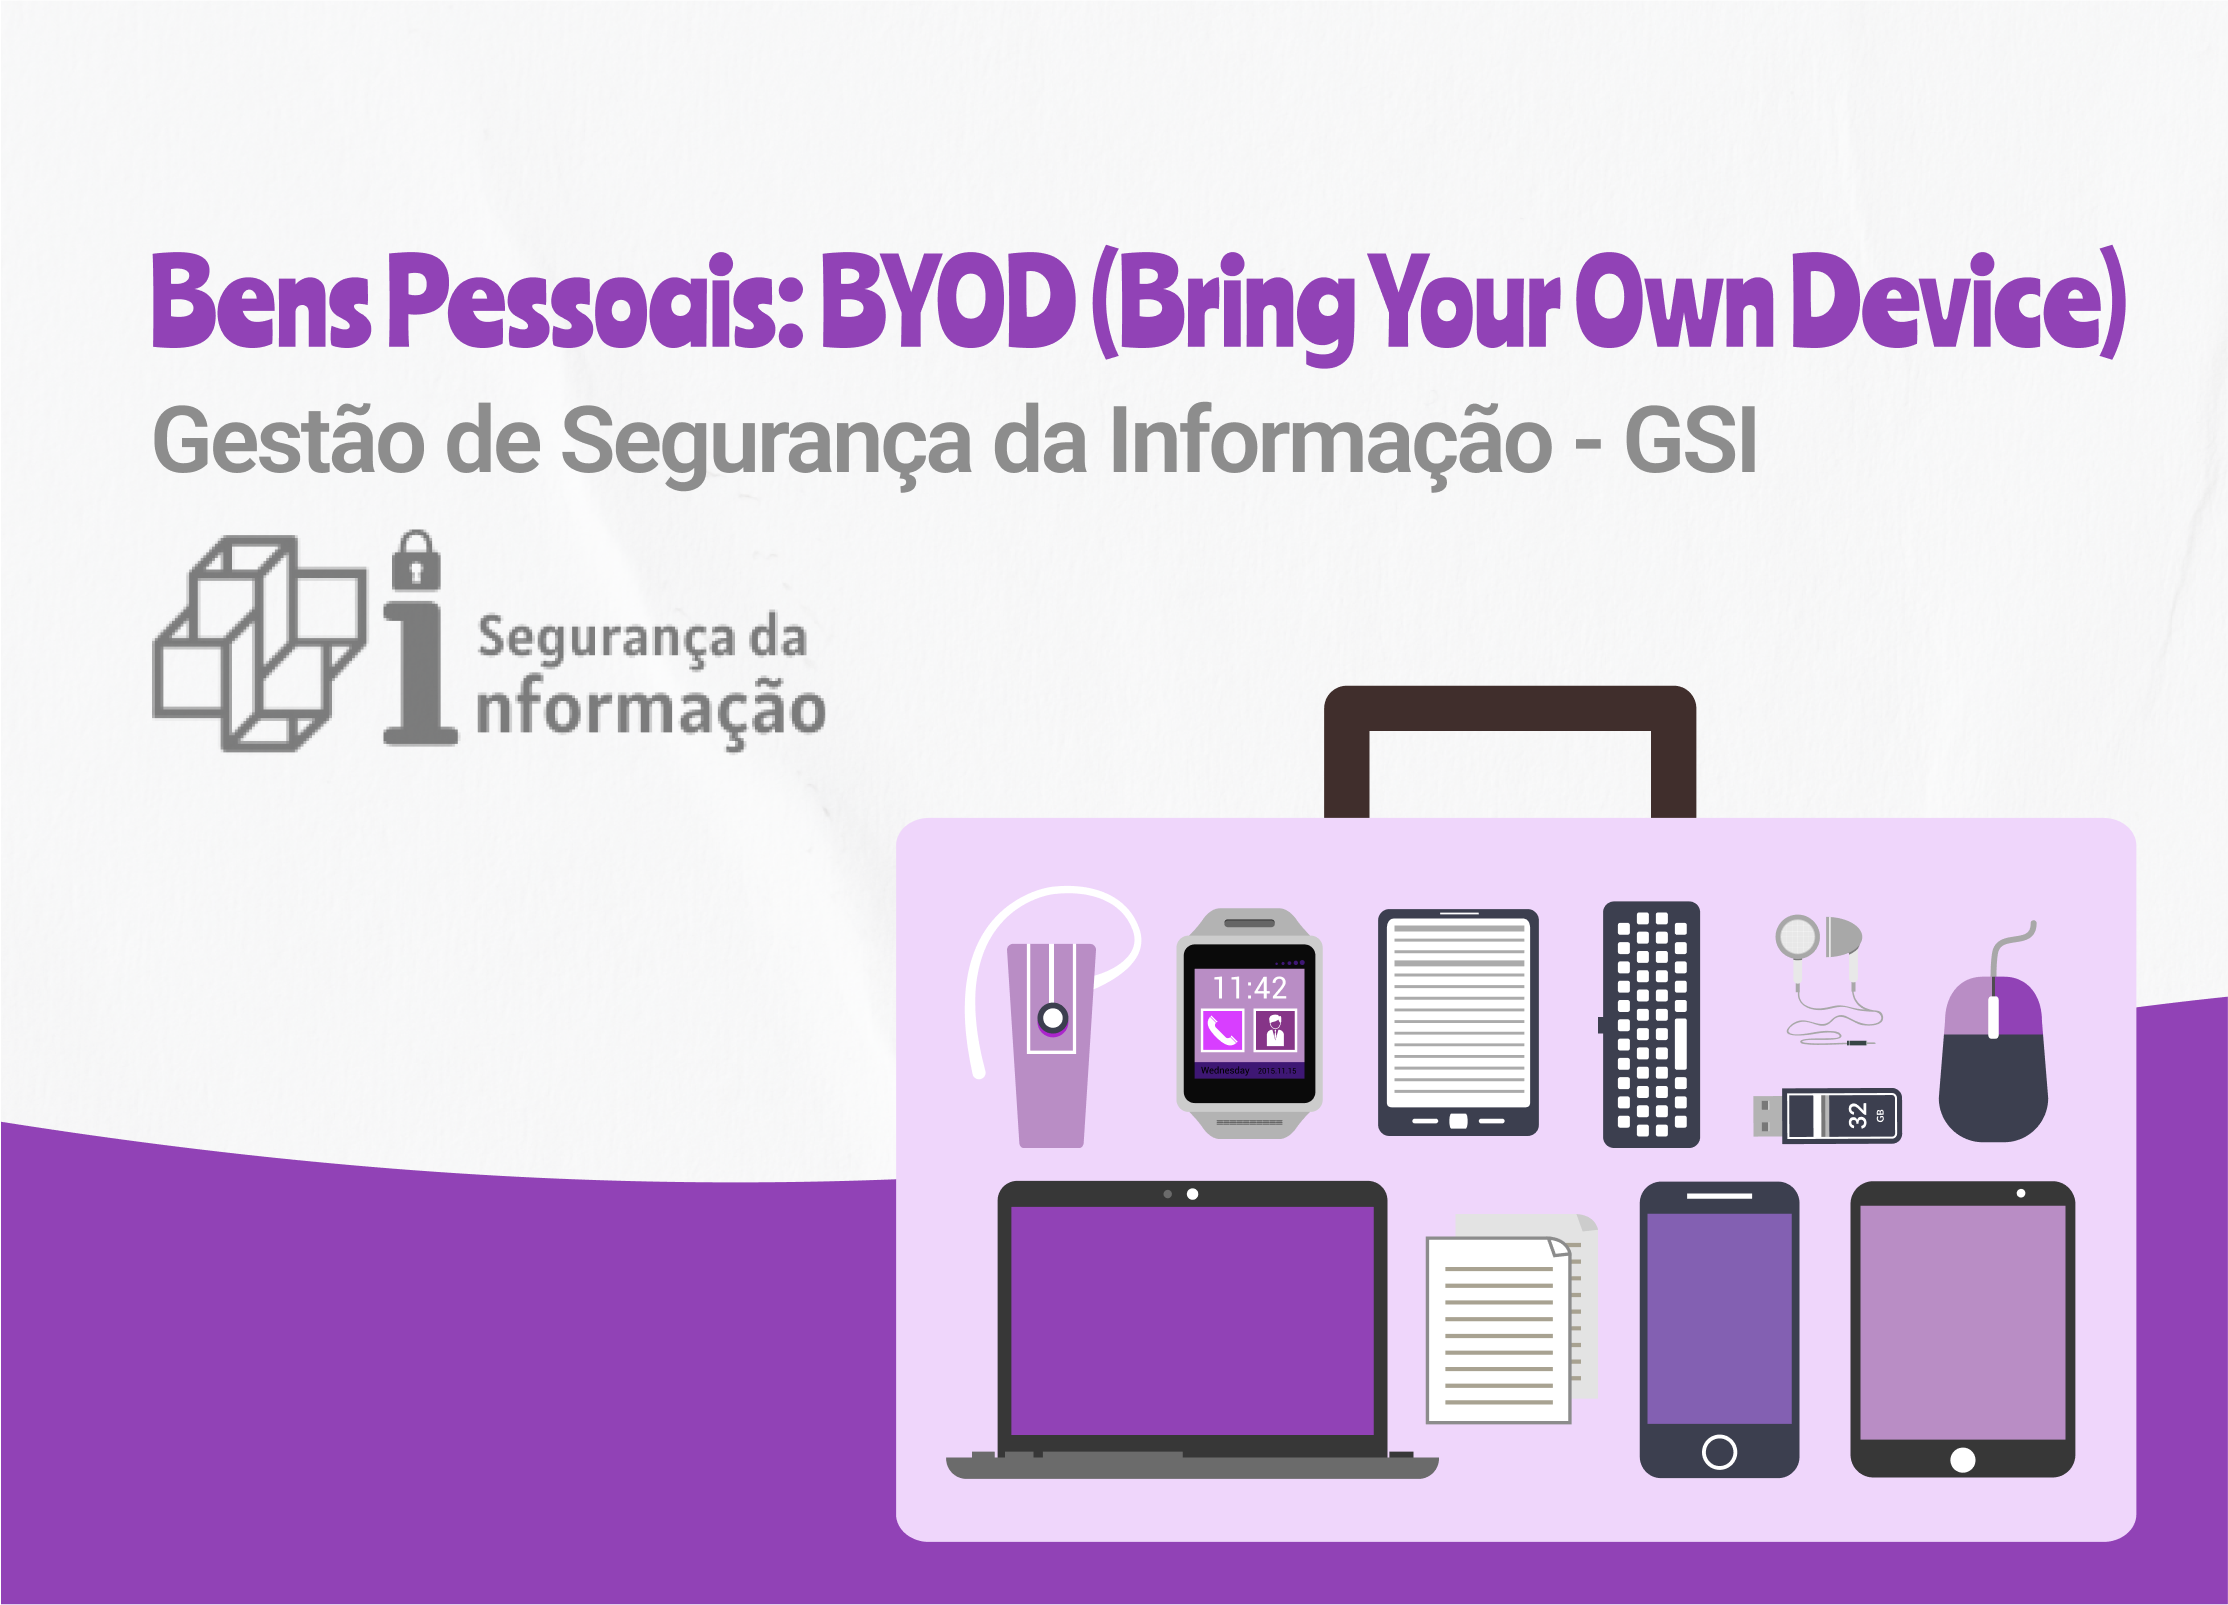 Bens Pessoais: BYOD (Bring Your Own Device)